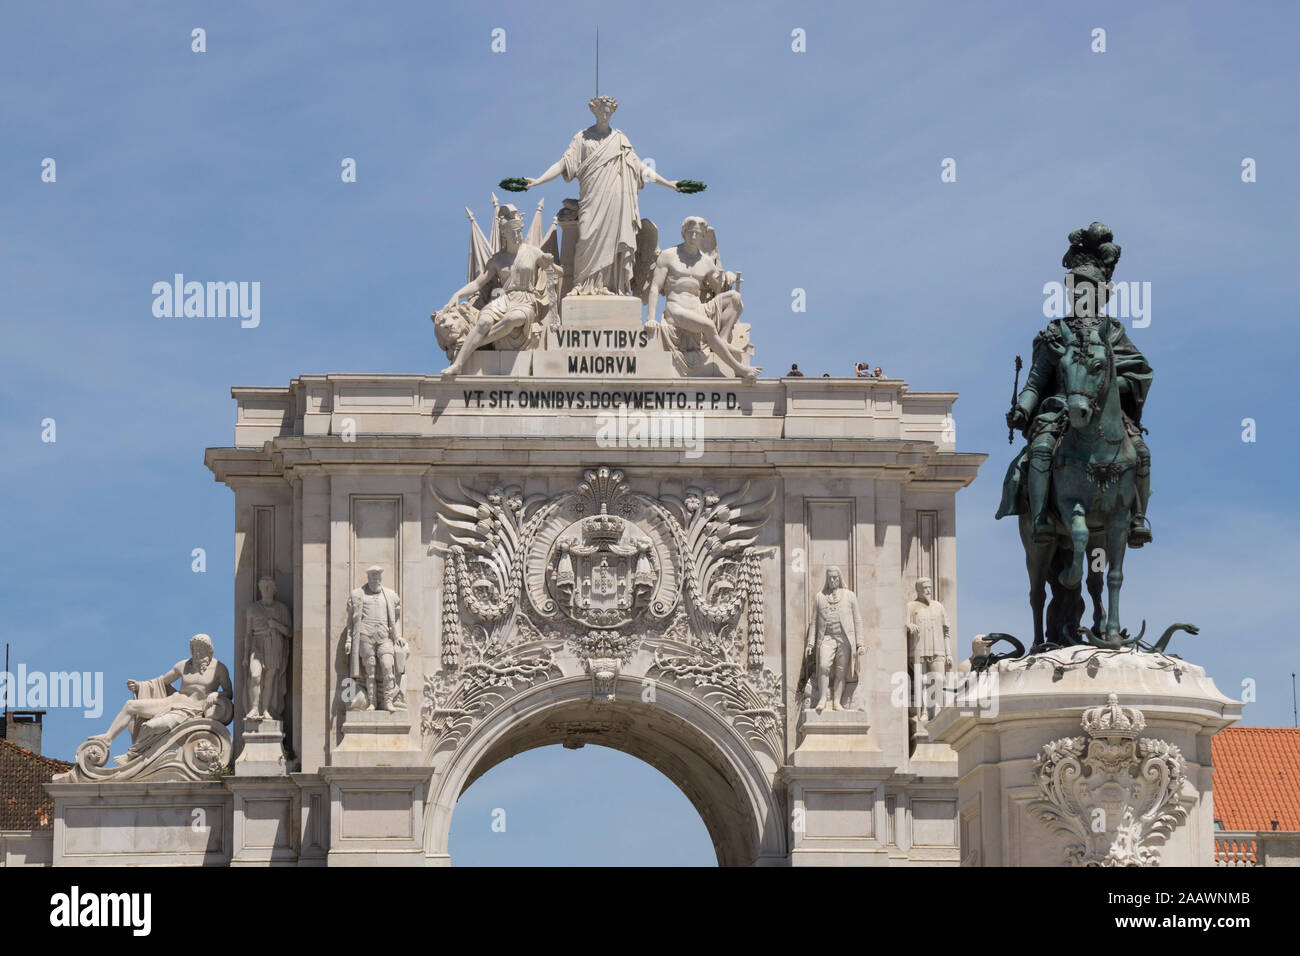 Low angle view of statue and triumphal arch in Lisbon, Portugal Stock Photo